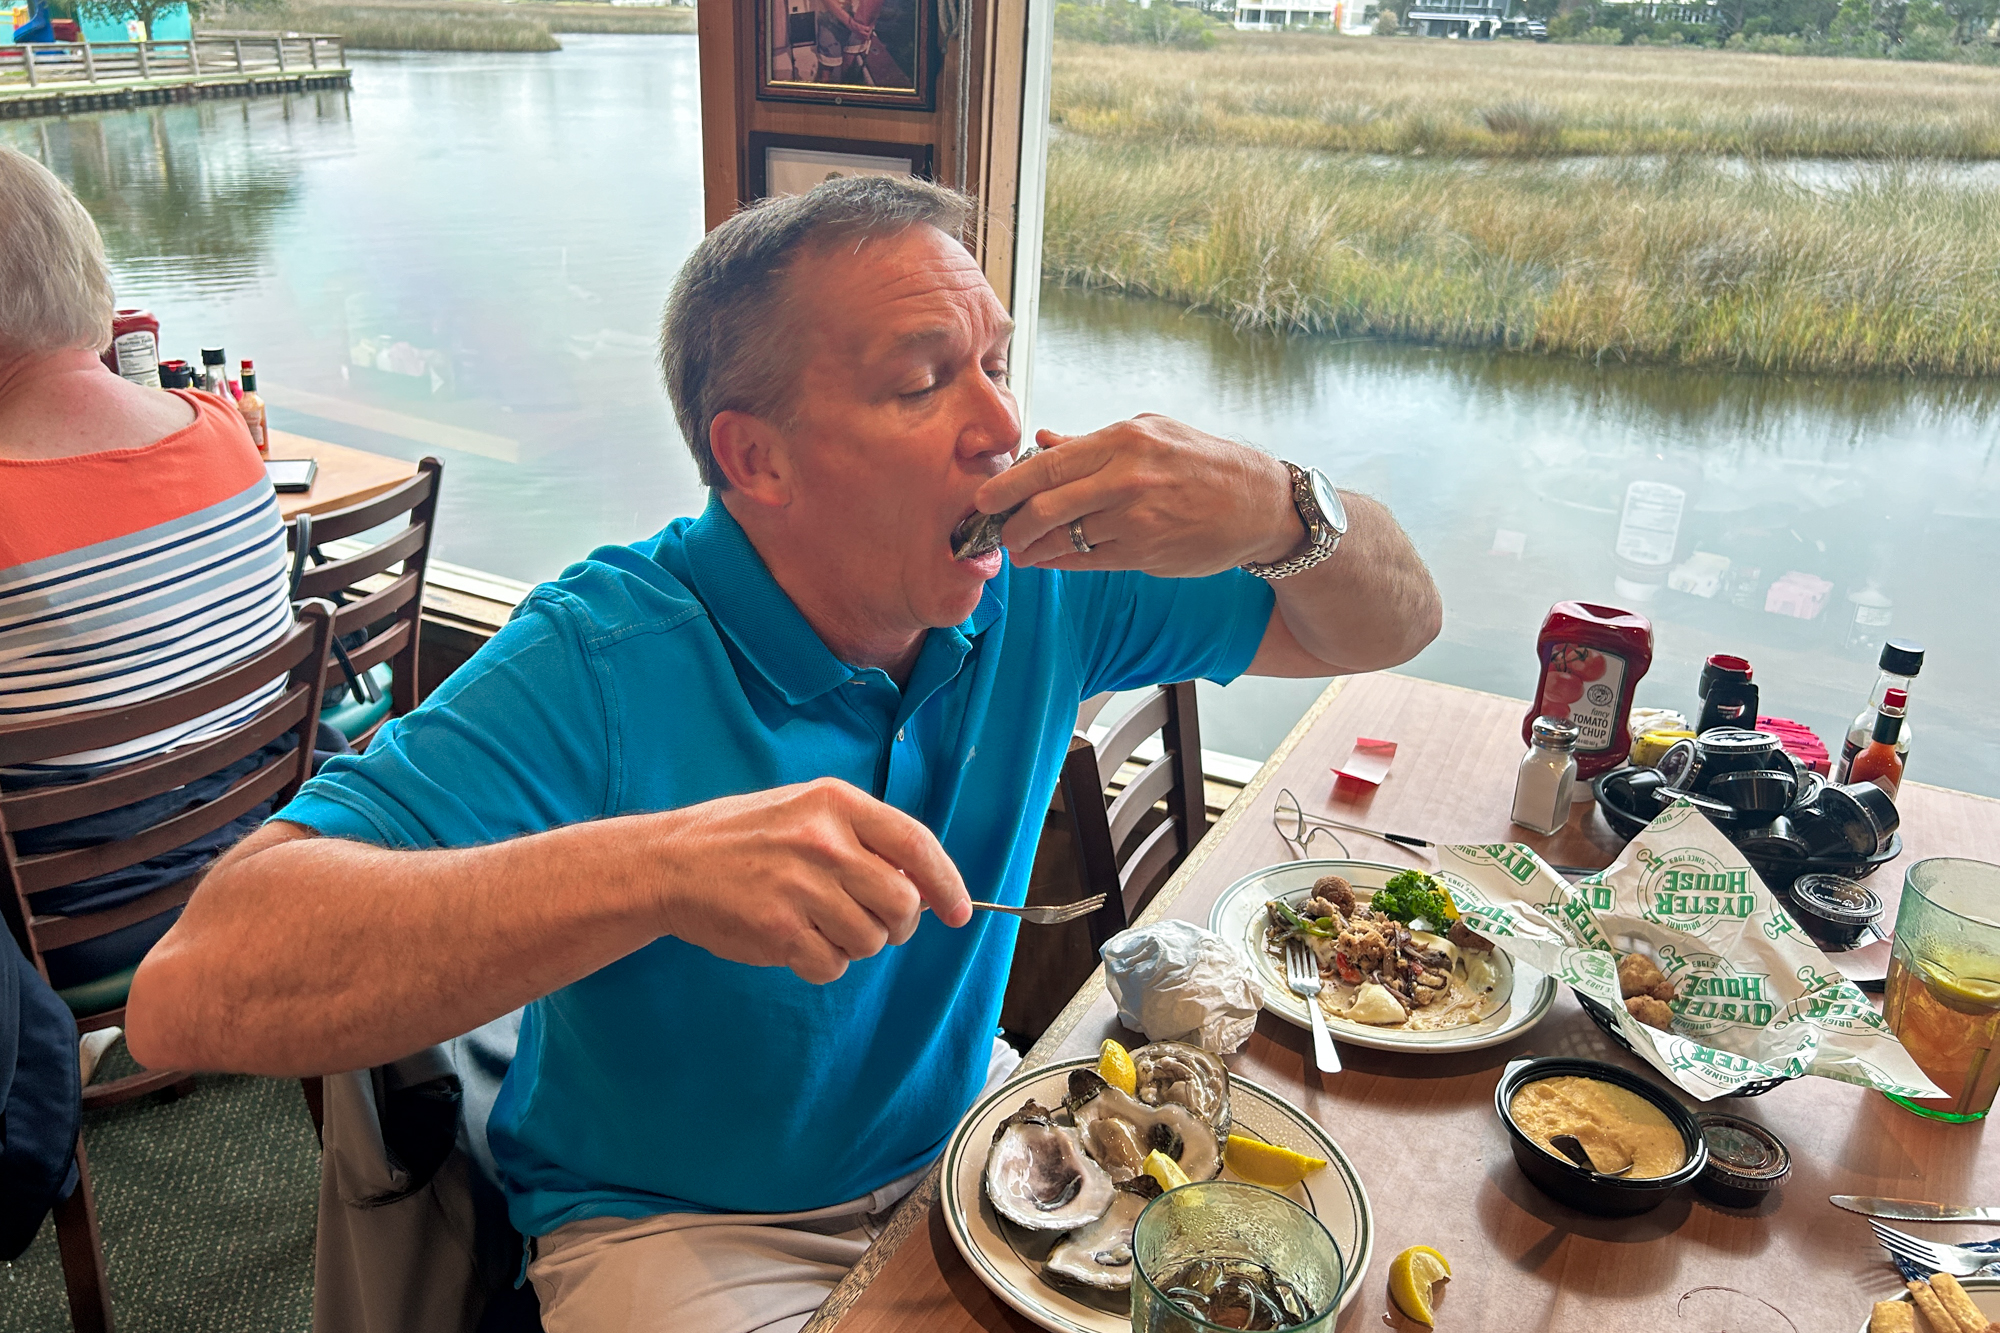 Jeremy Sullivan of Orange Beach, Alabama, enjoys oysters on the half shell at the Original Oyster House in Gulf Shores, Alabama. (Photo: Original Oyster House)